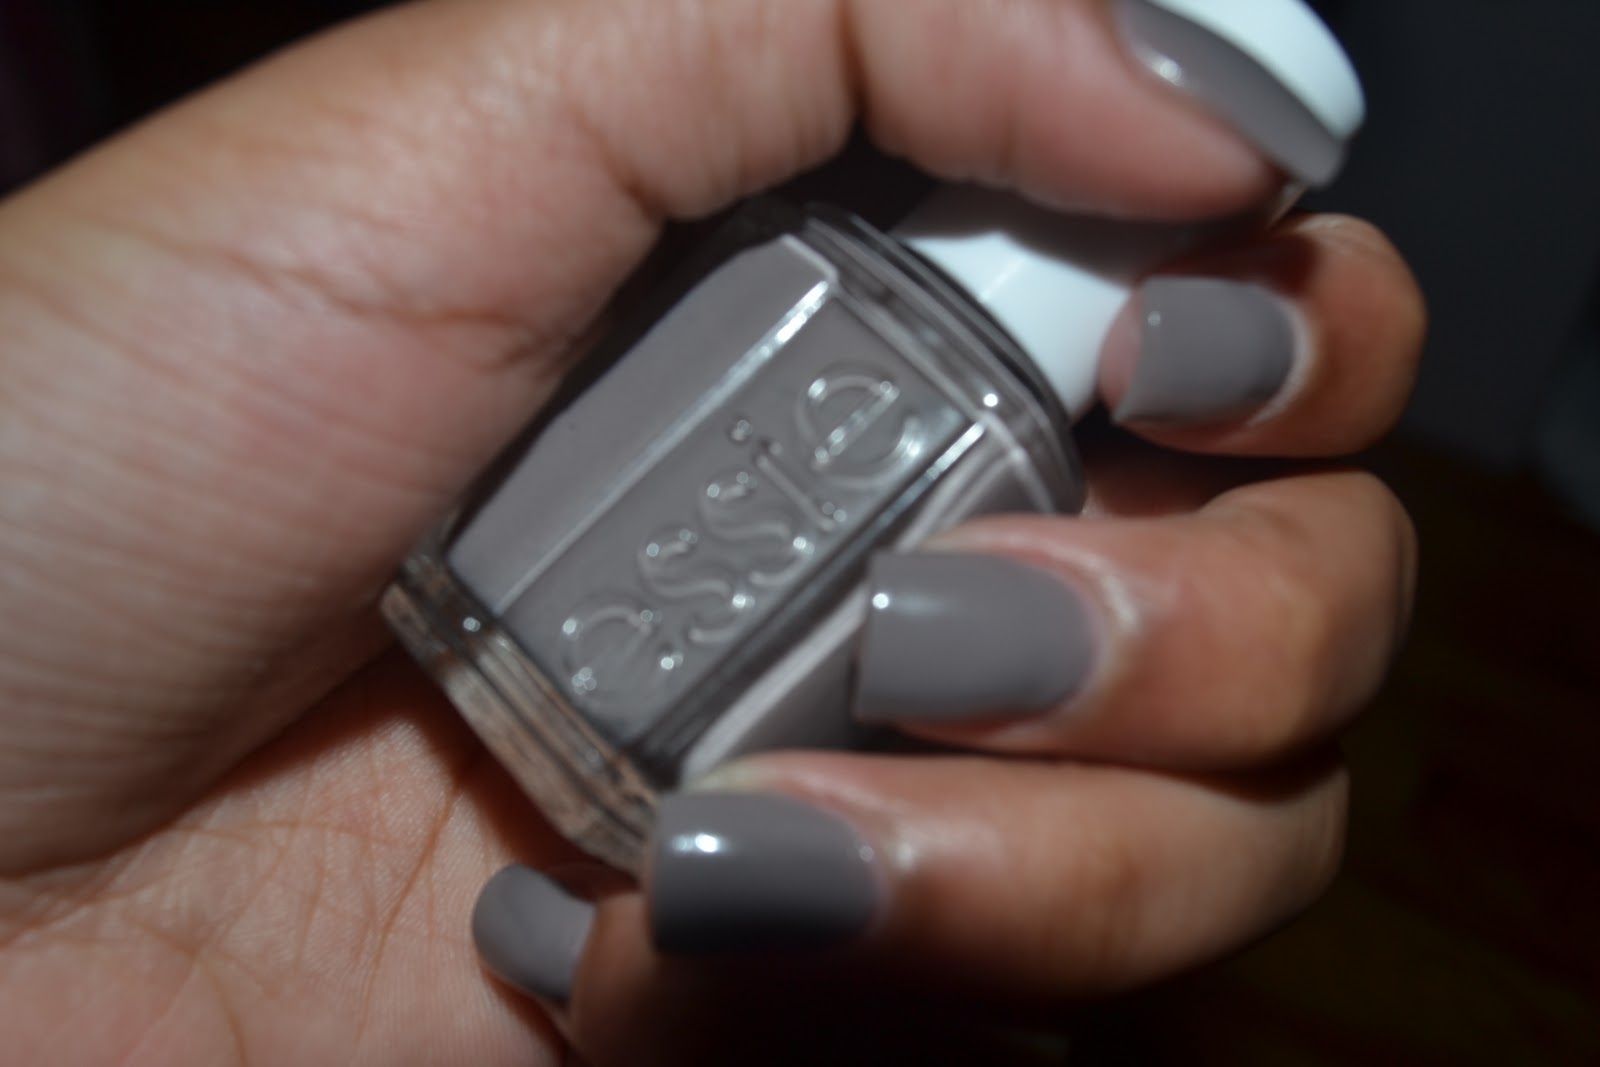 2. Essie Nail Polish in "Chinchilly" - wide 4